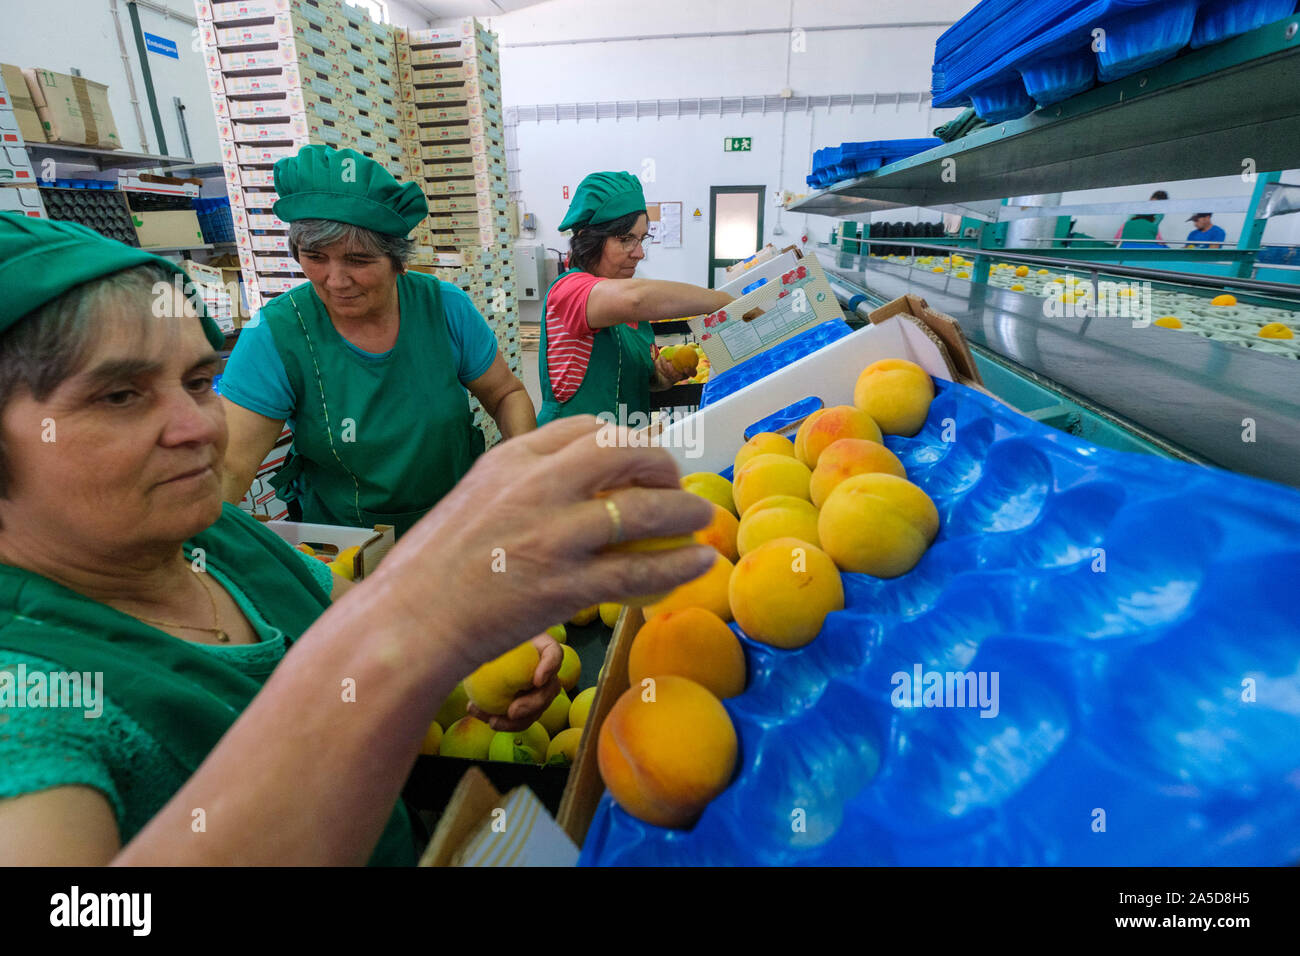 Female workers at a fruit sorting and packaging industrial facility Stock Photo